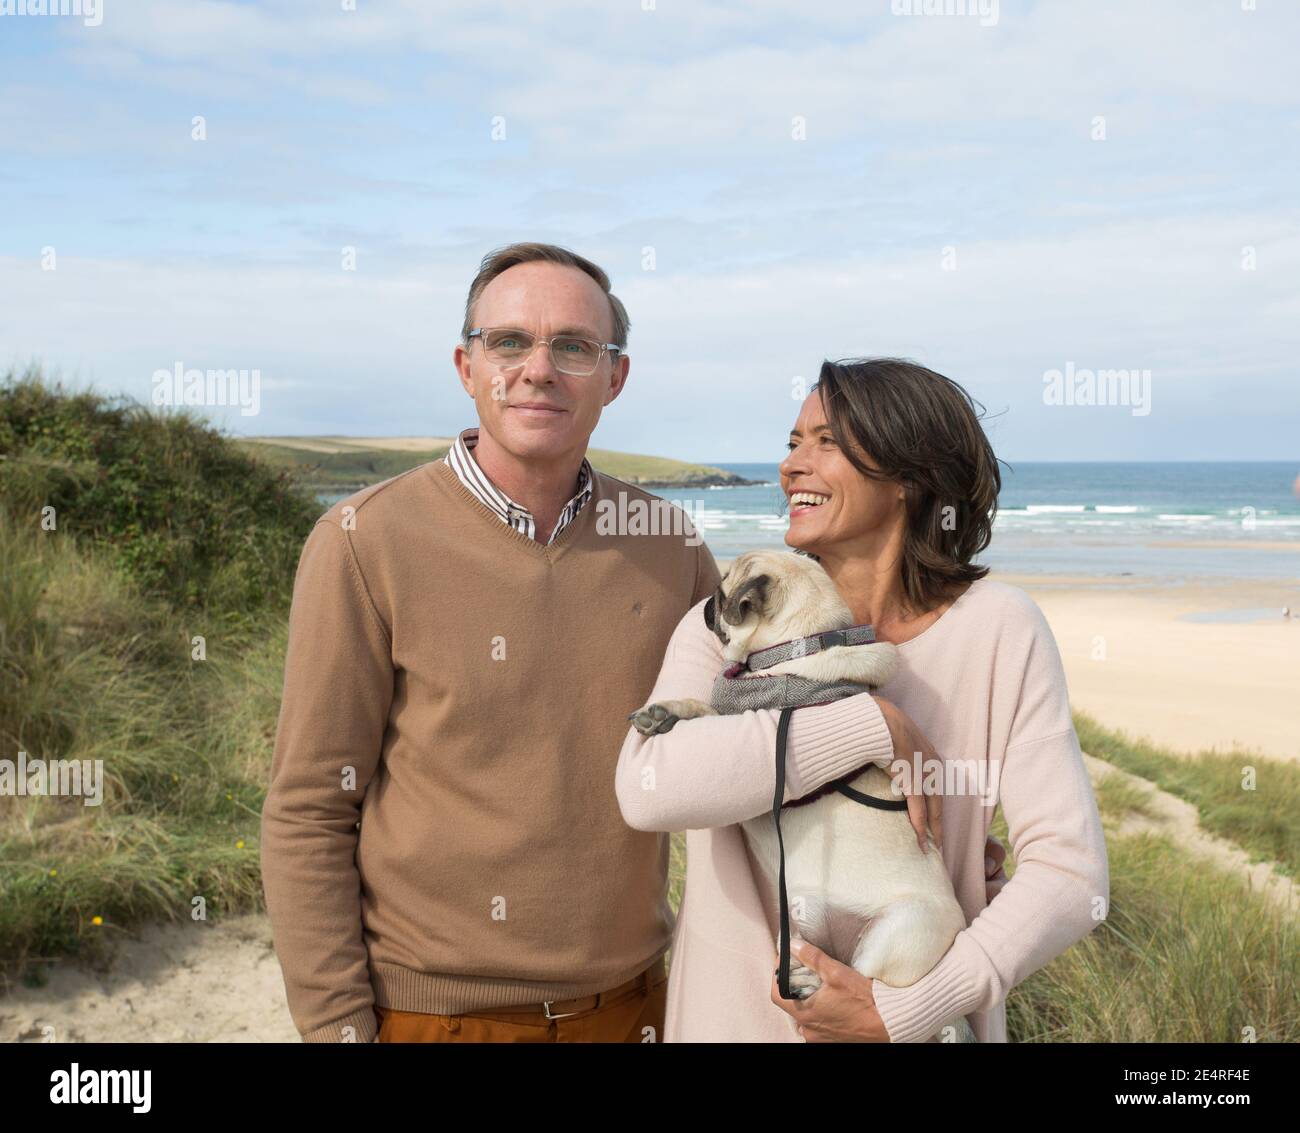 GREAT BRITAIN / England / Cornwall / Rosamunde Pilcher/ The German actress Ulrike Folkerts and actor Dirk Martens . Stock Photo